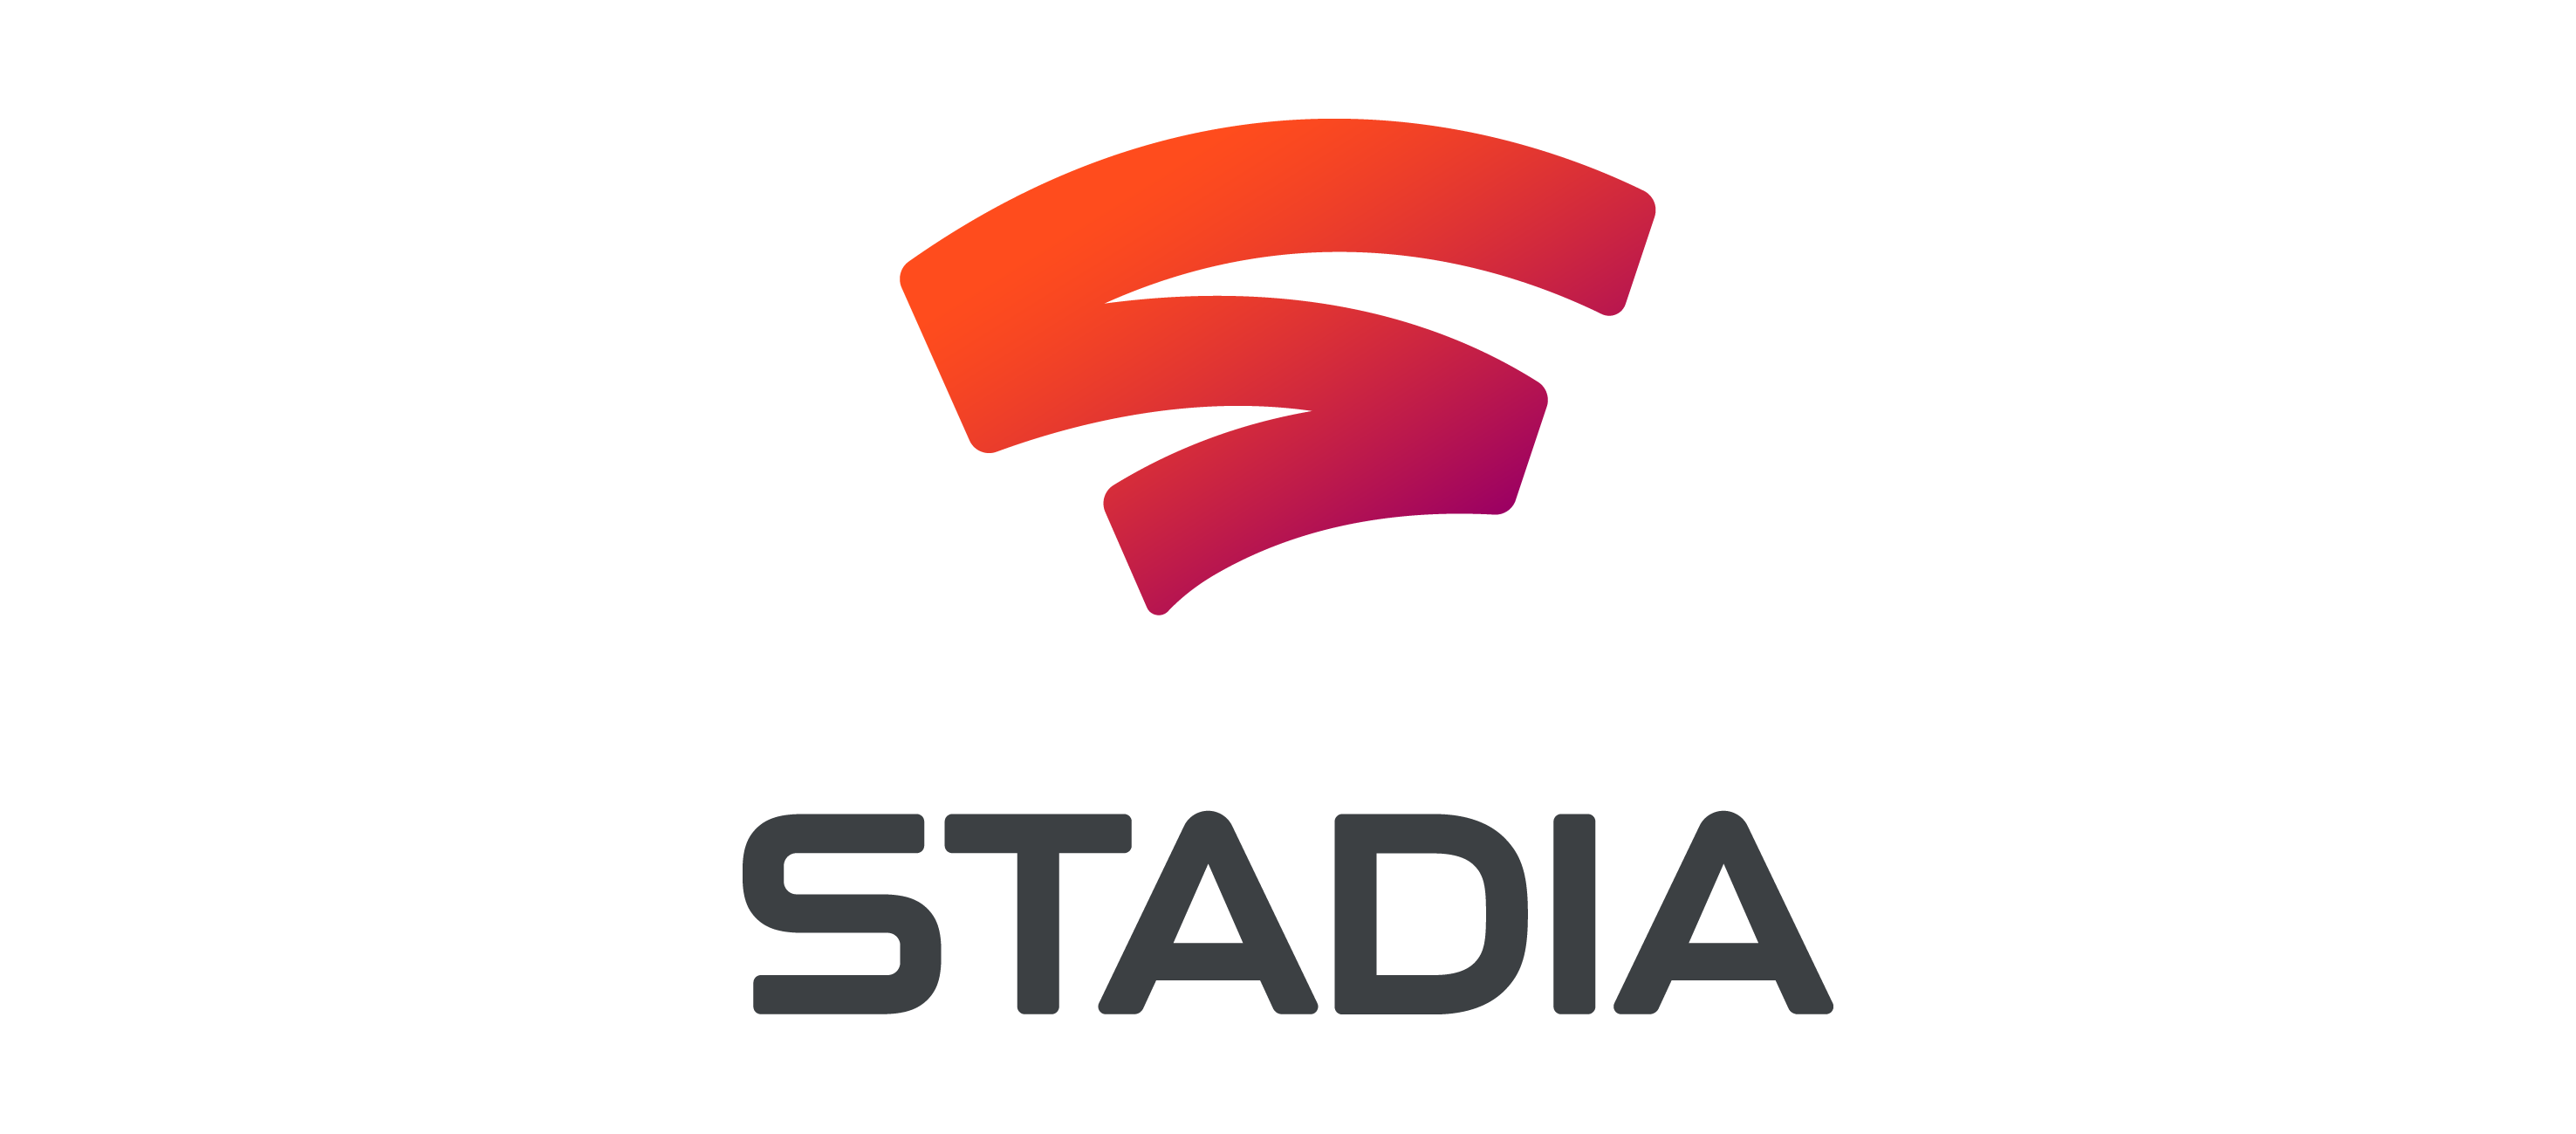 Google GDC 2019 Recap: Google Platform “Stadia” is “Dead Serious” about getting into gaming